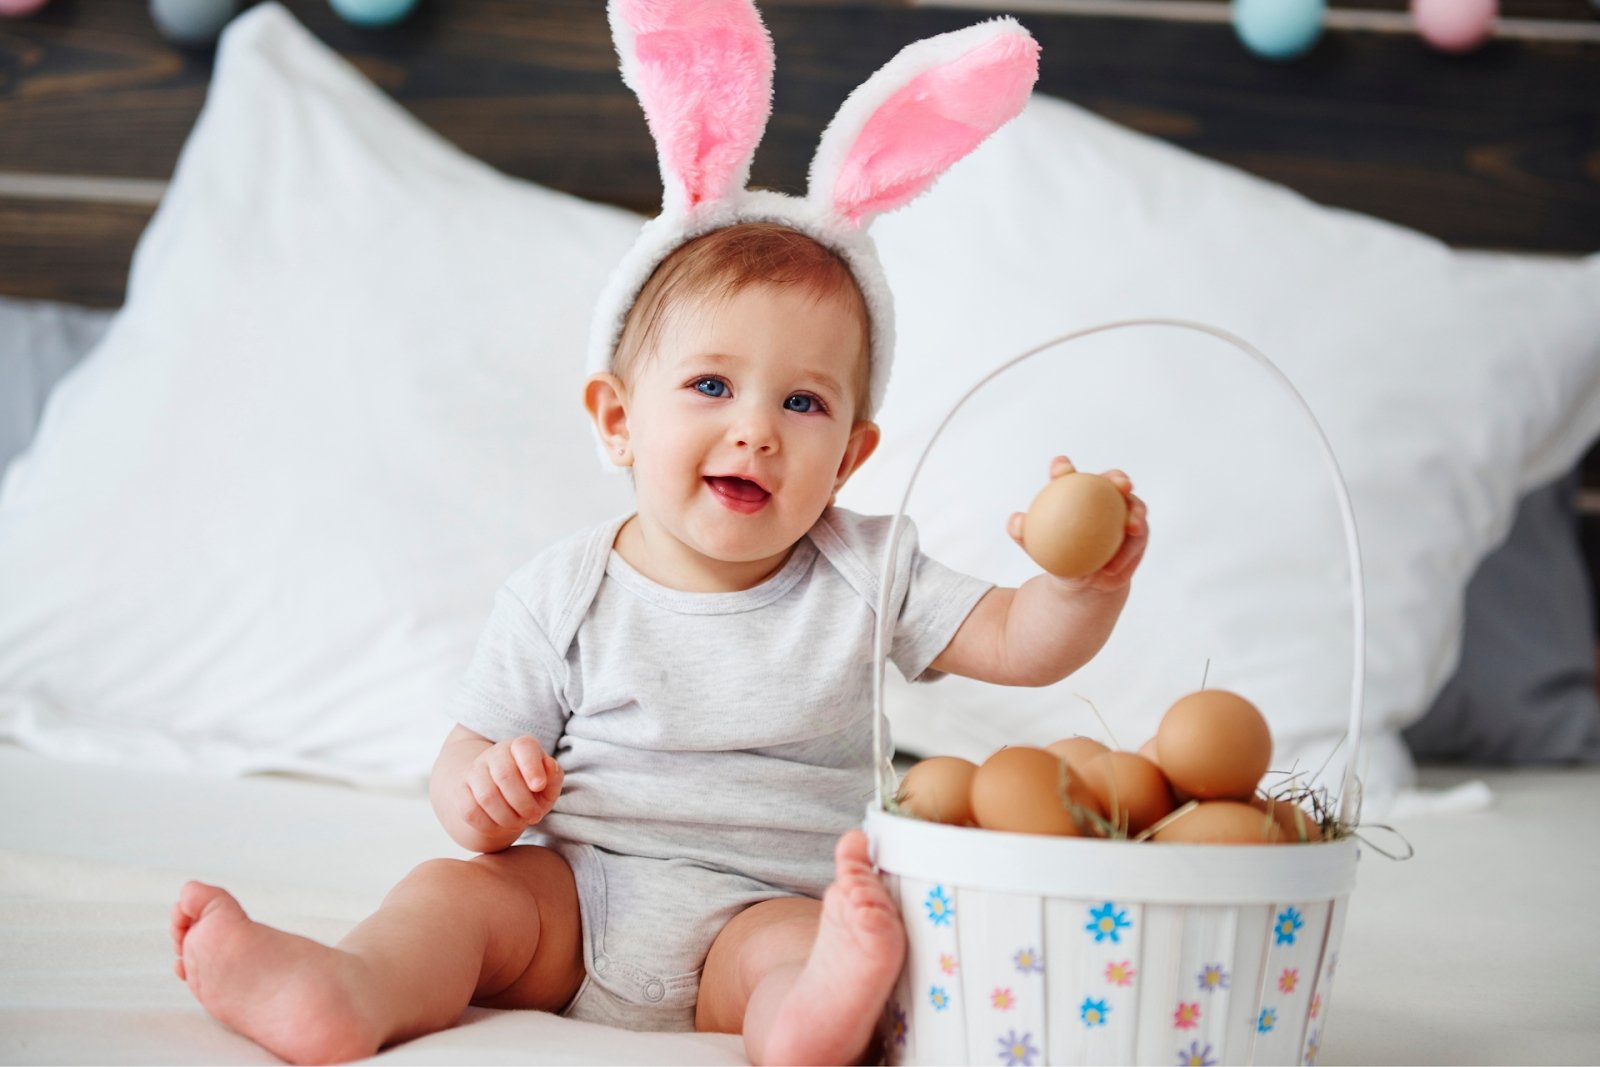 6 Adorable Easter Basket Stuffers Created by Small Businesses - Wear Lark